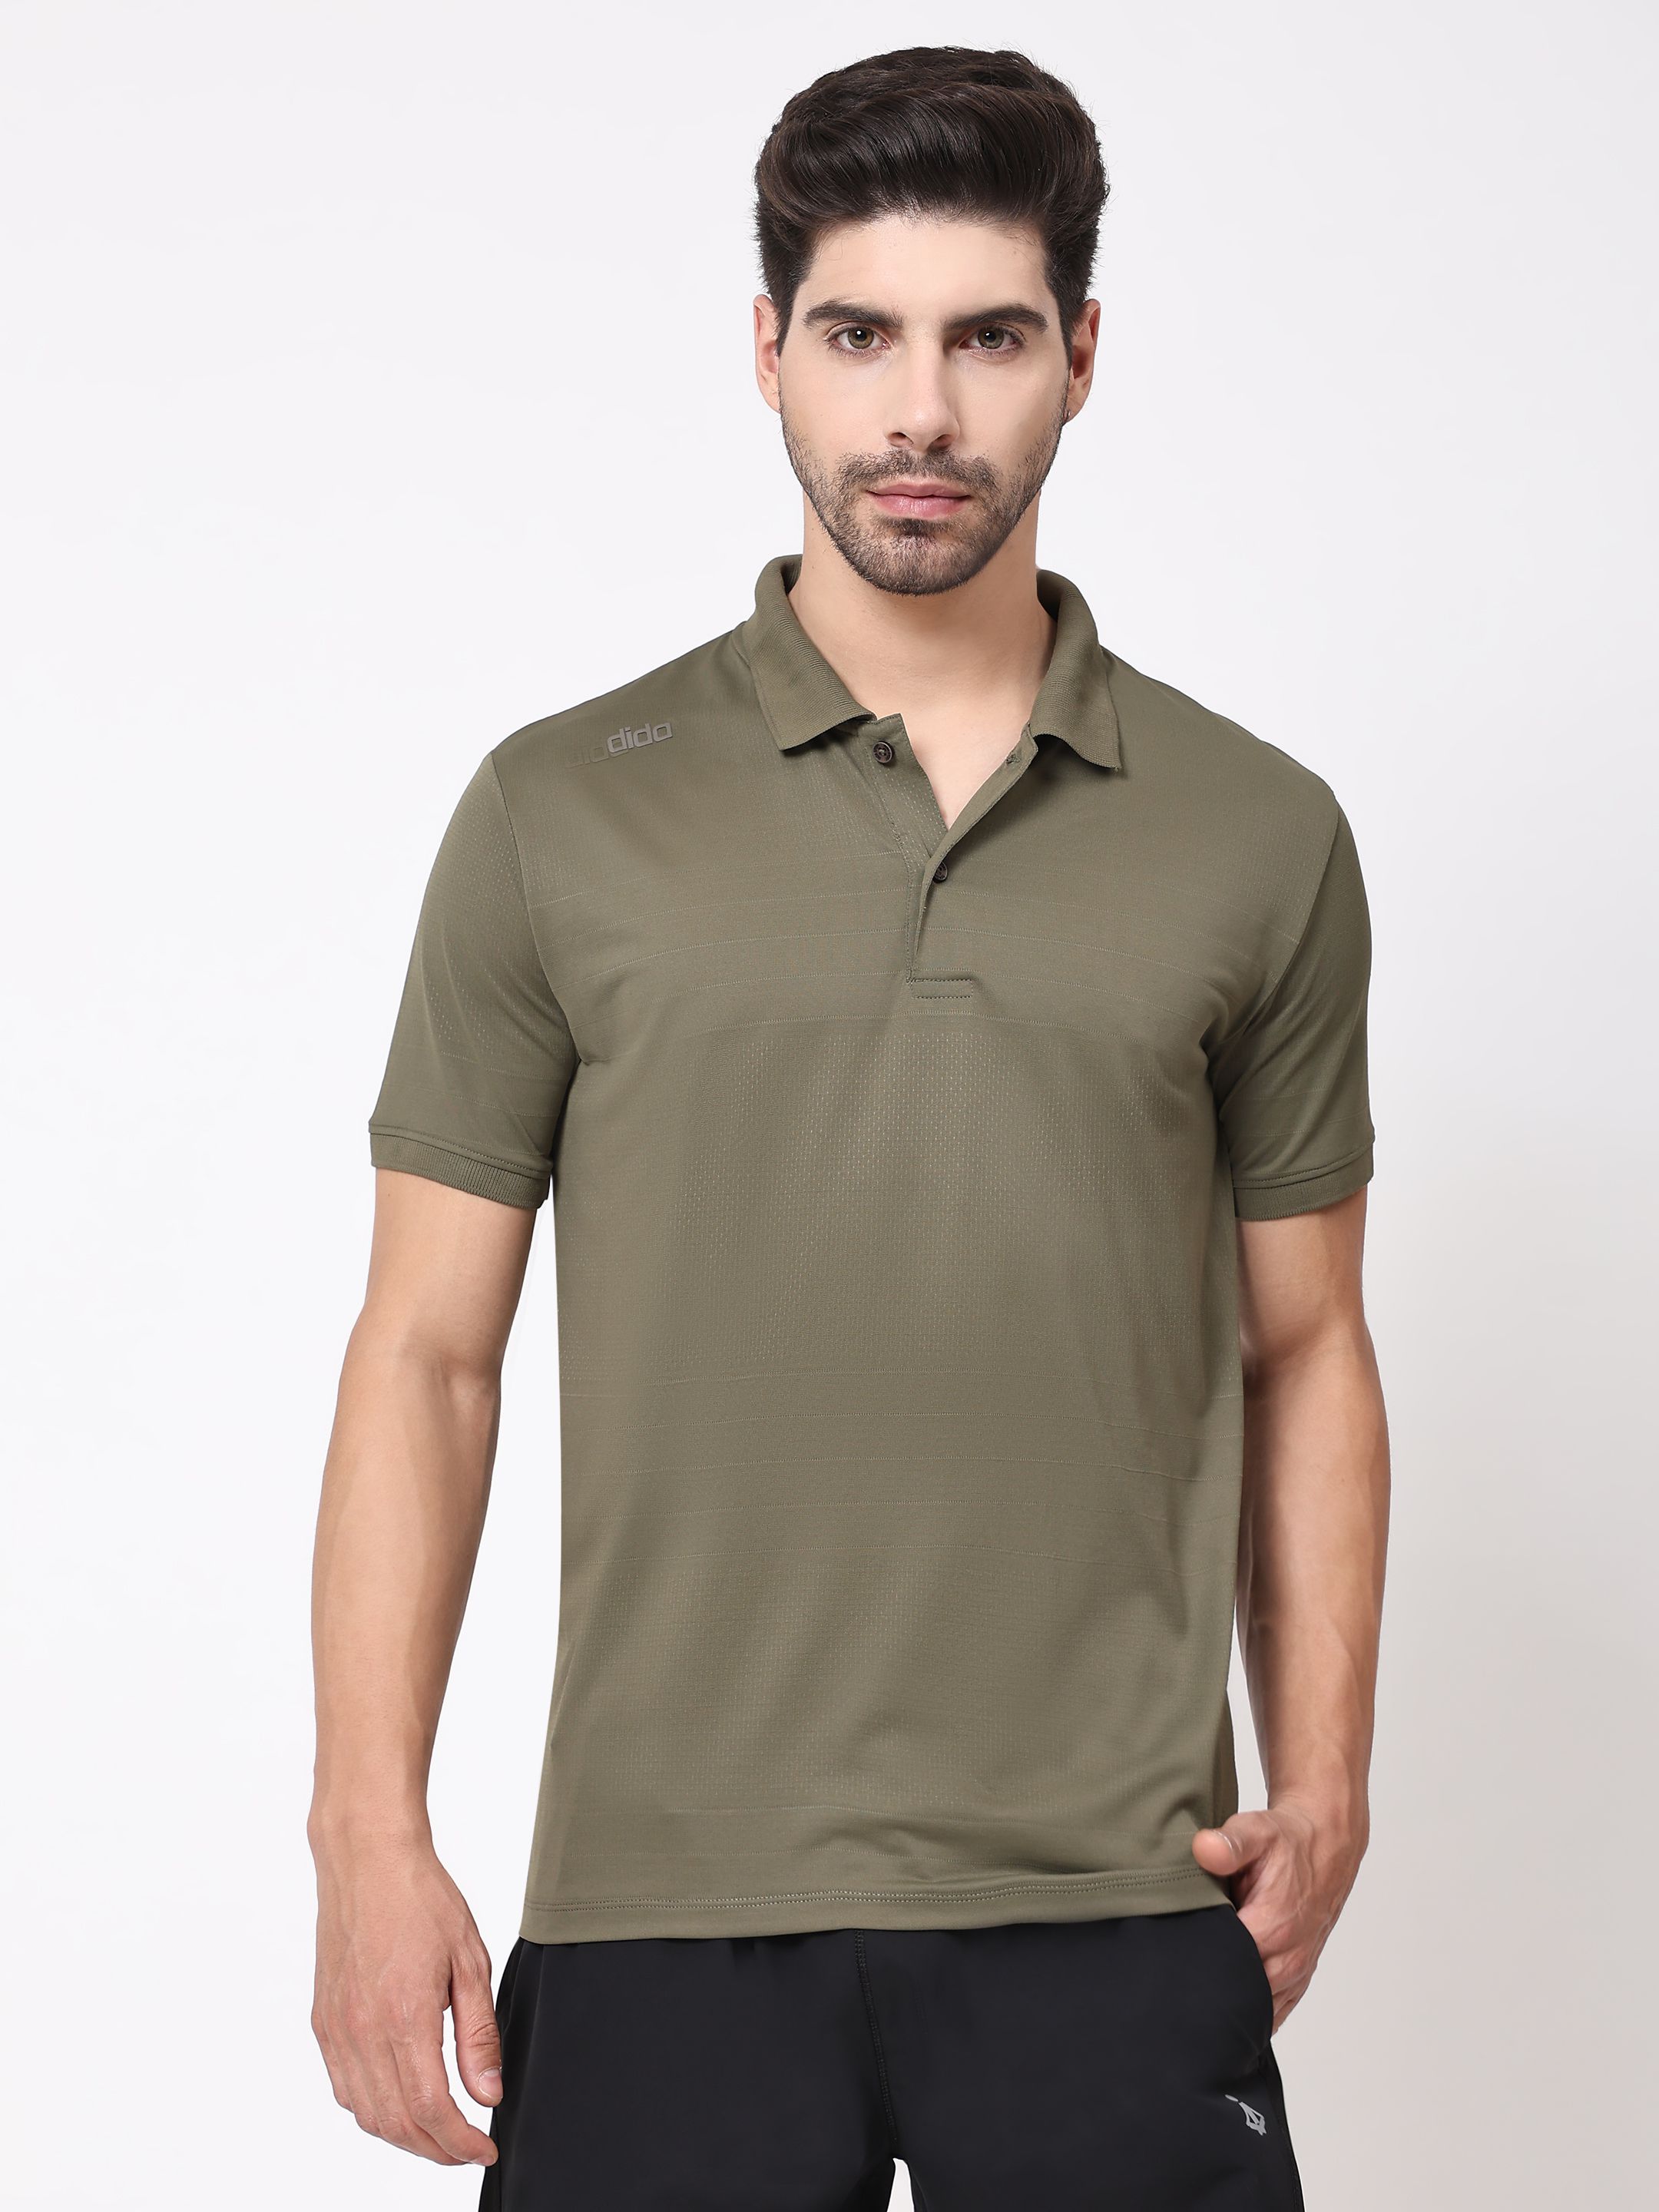     			Dida Sportswear Olive Polyester Regular Fit Men's Sports Polo T-Shirt ( Pack of 1 )